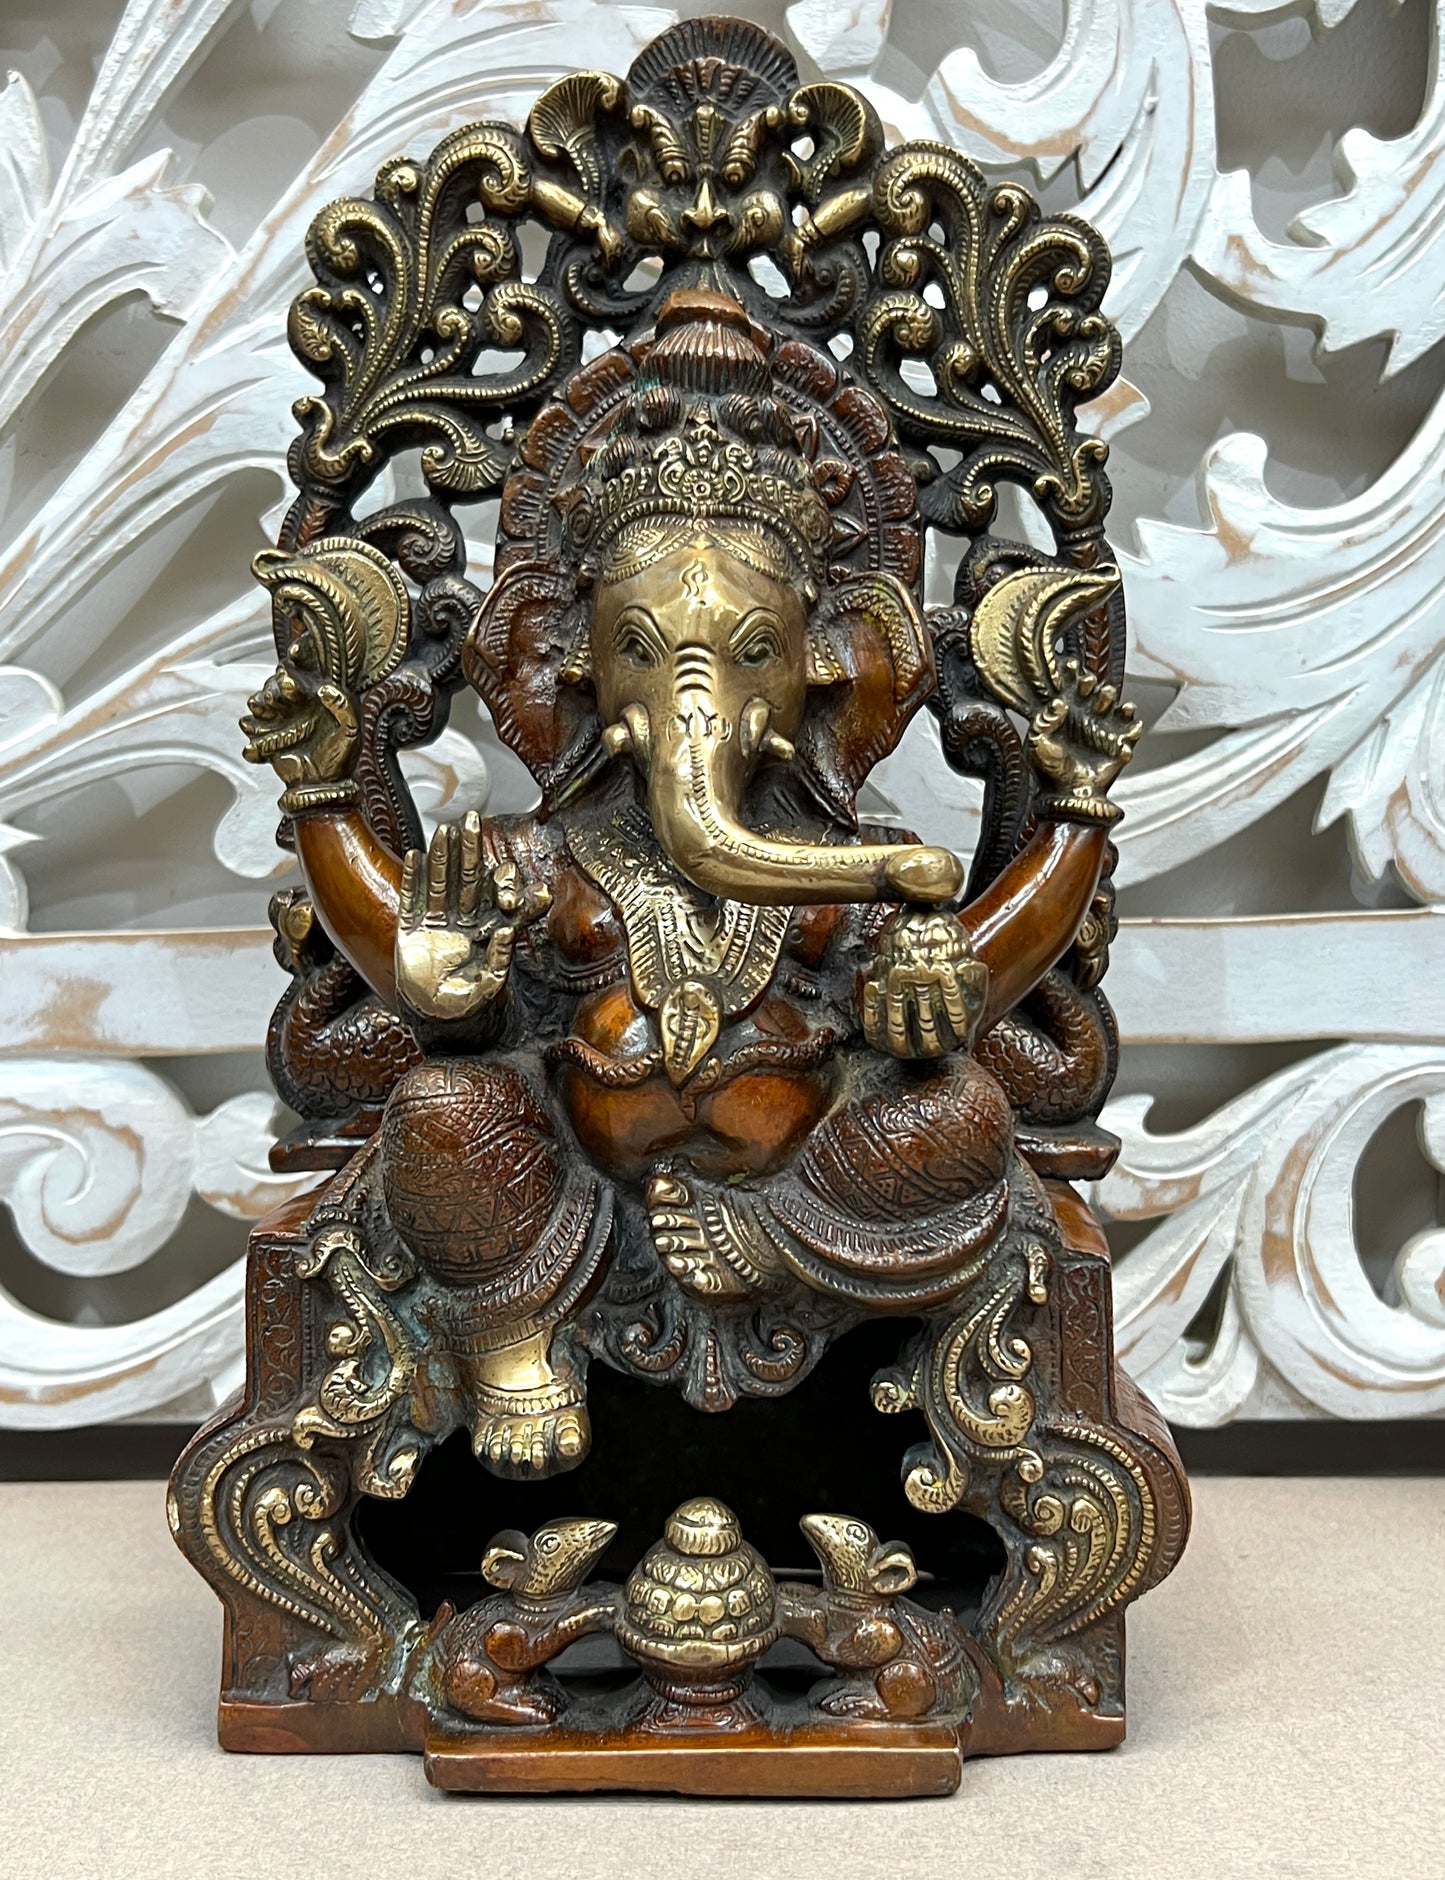 Ganesh Statues - Remover of Obstacles 33cm x 19cm